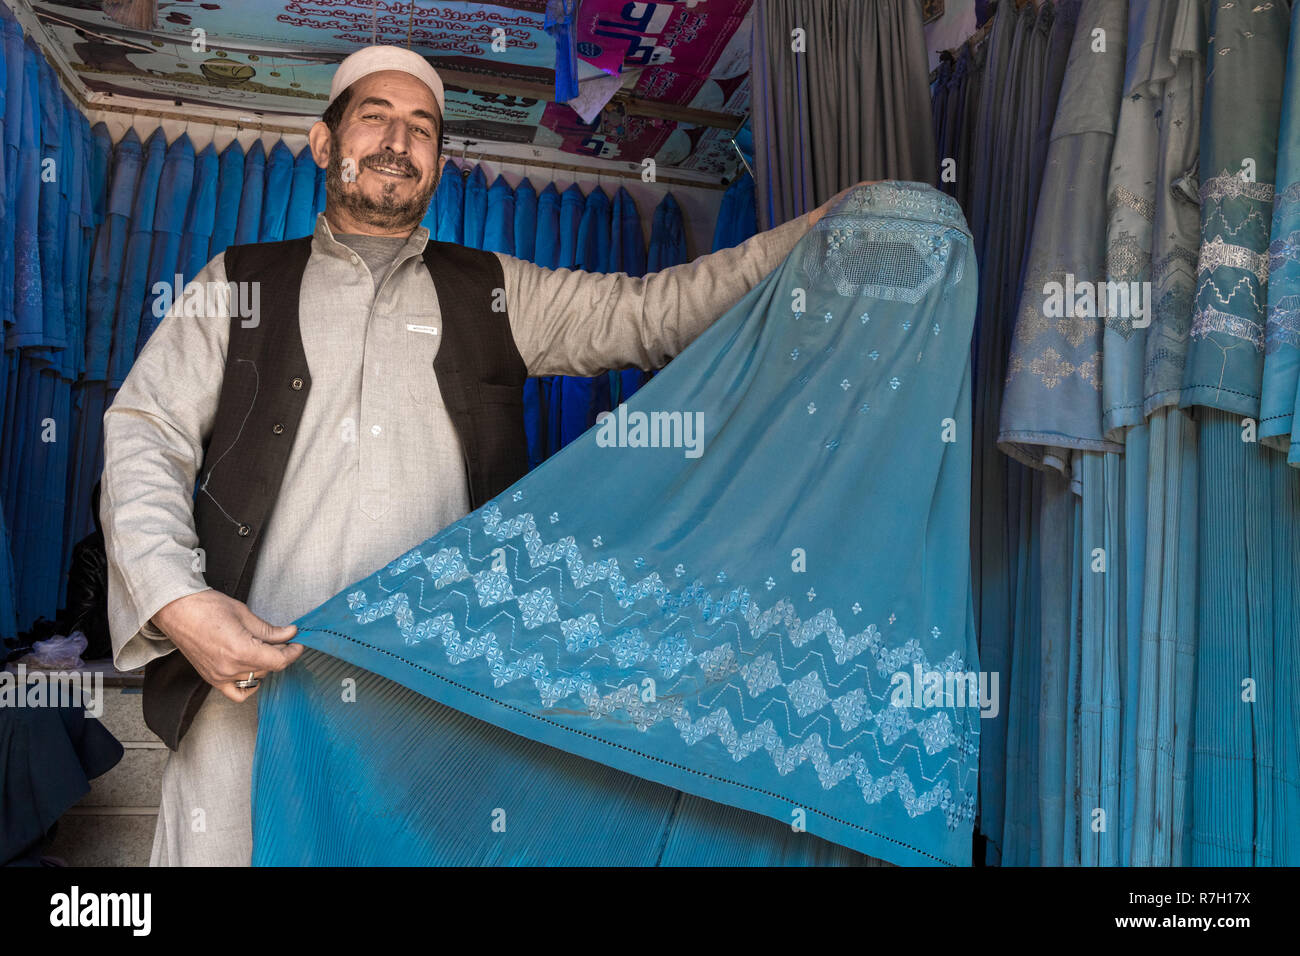 Man Selling Blue Burqa In Old City Bazar, Herat, Herat Province, Afghanistan Stock Photo